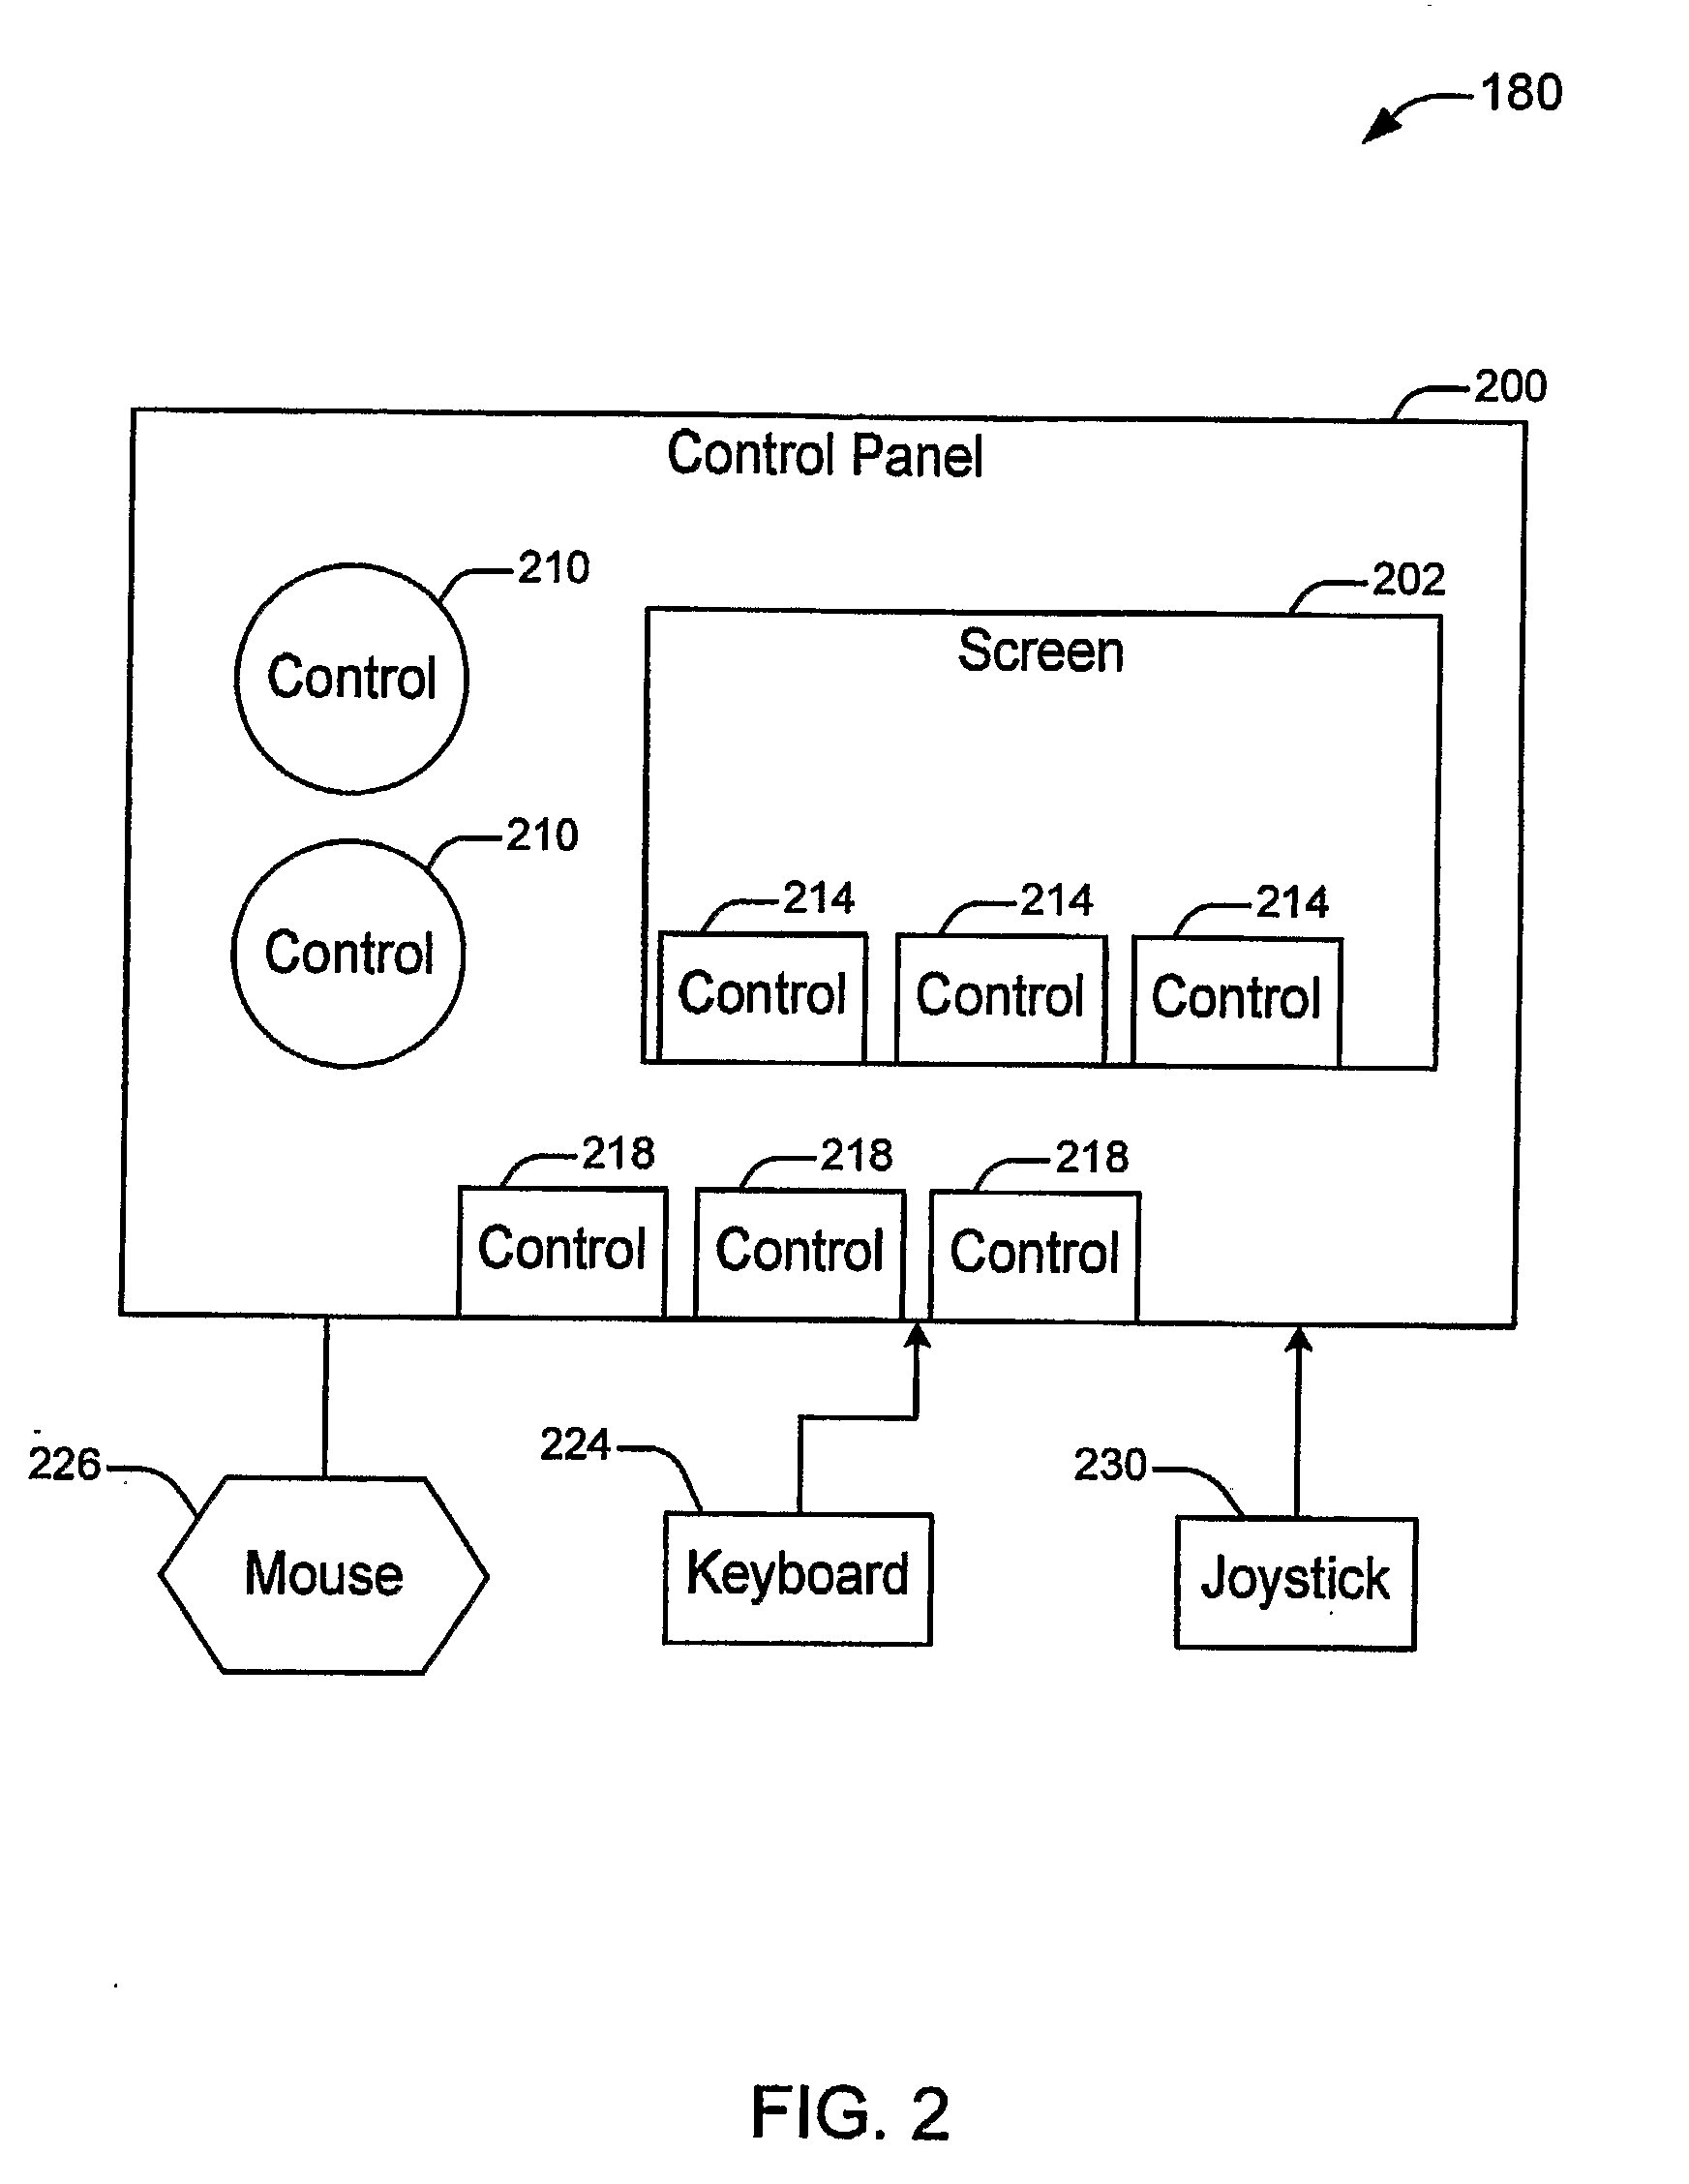 Method, apparatus and system for personalized broadcast media reception